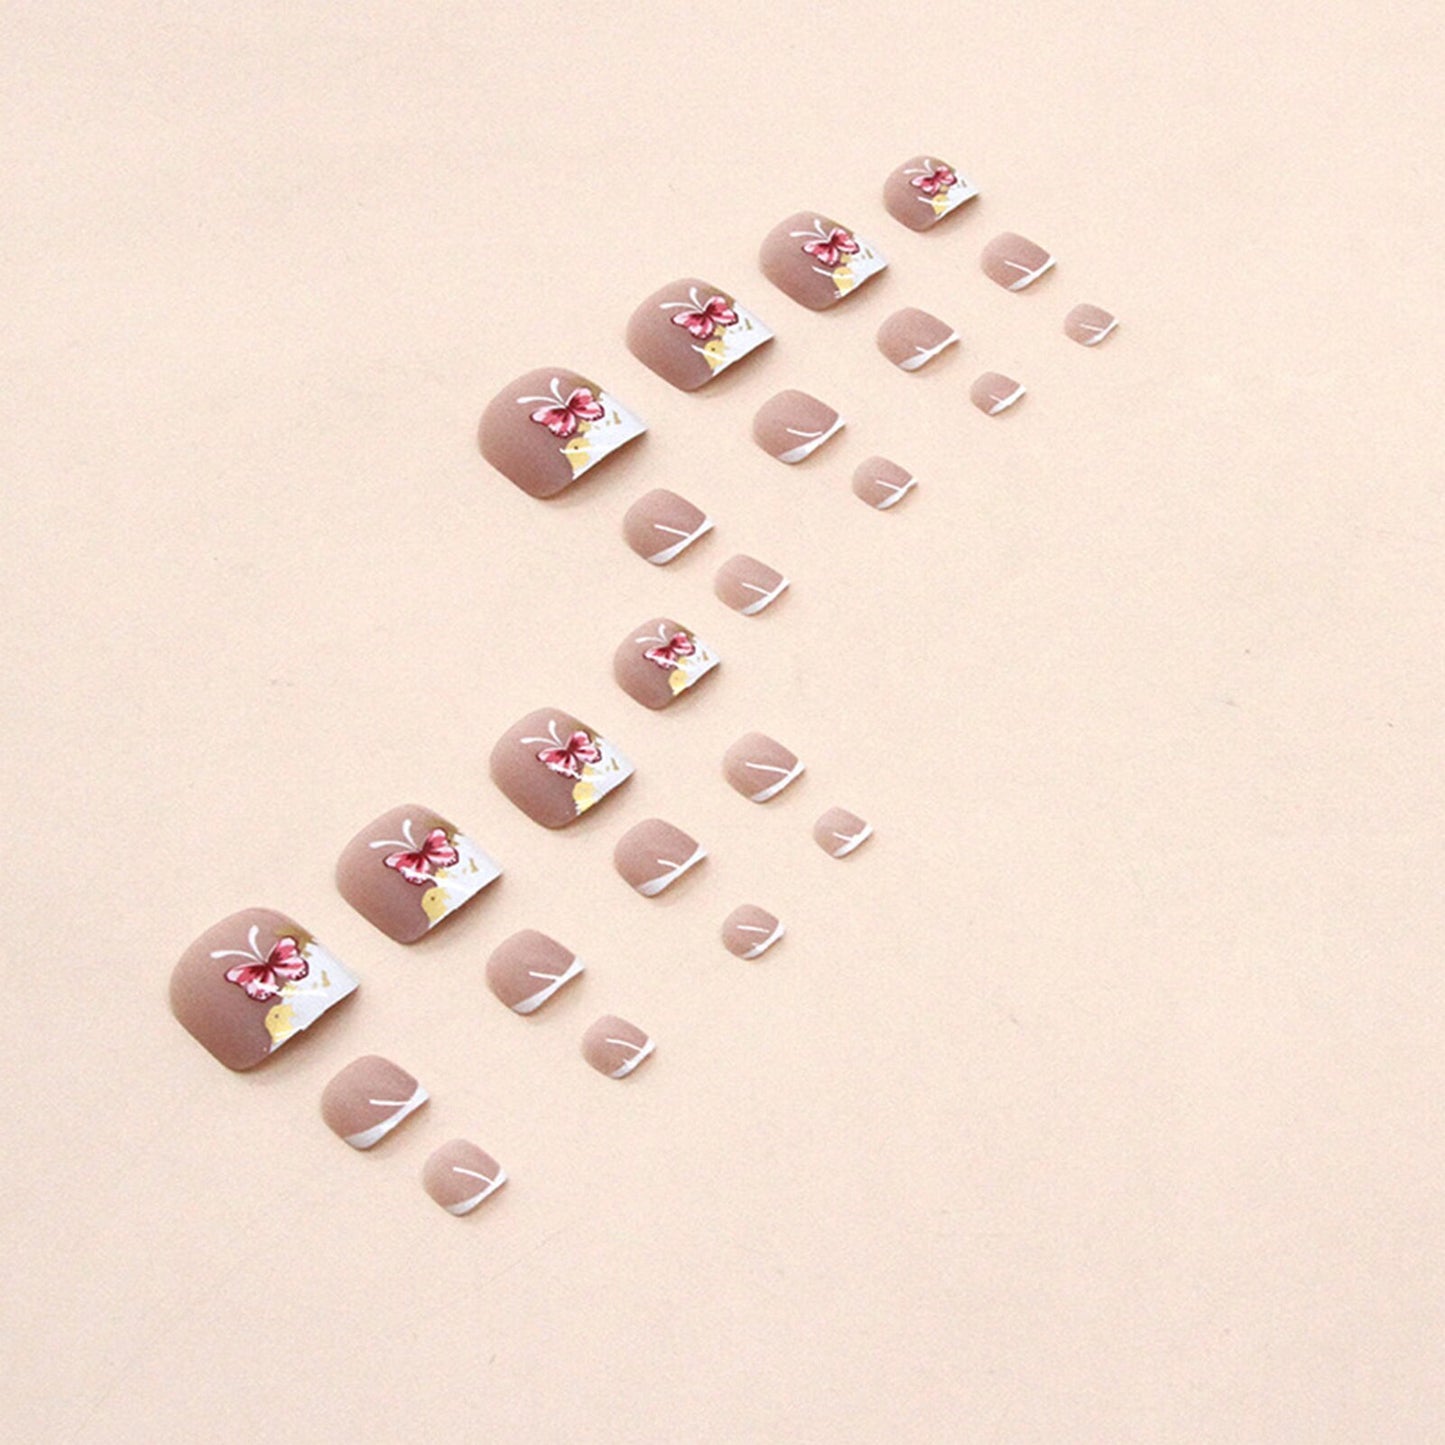 Pink Butterfly Fake Toenails With Designs Press On Nail Tips Classic White French False Toenails For Girls Decoration Nails Art